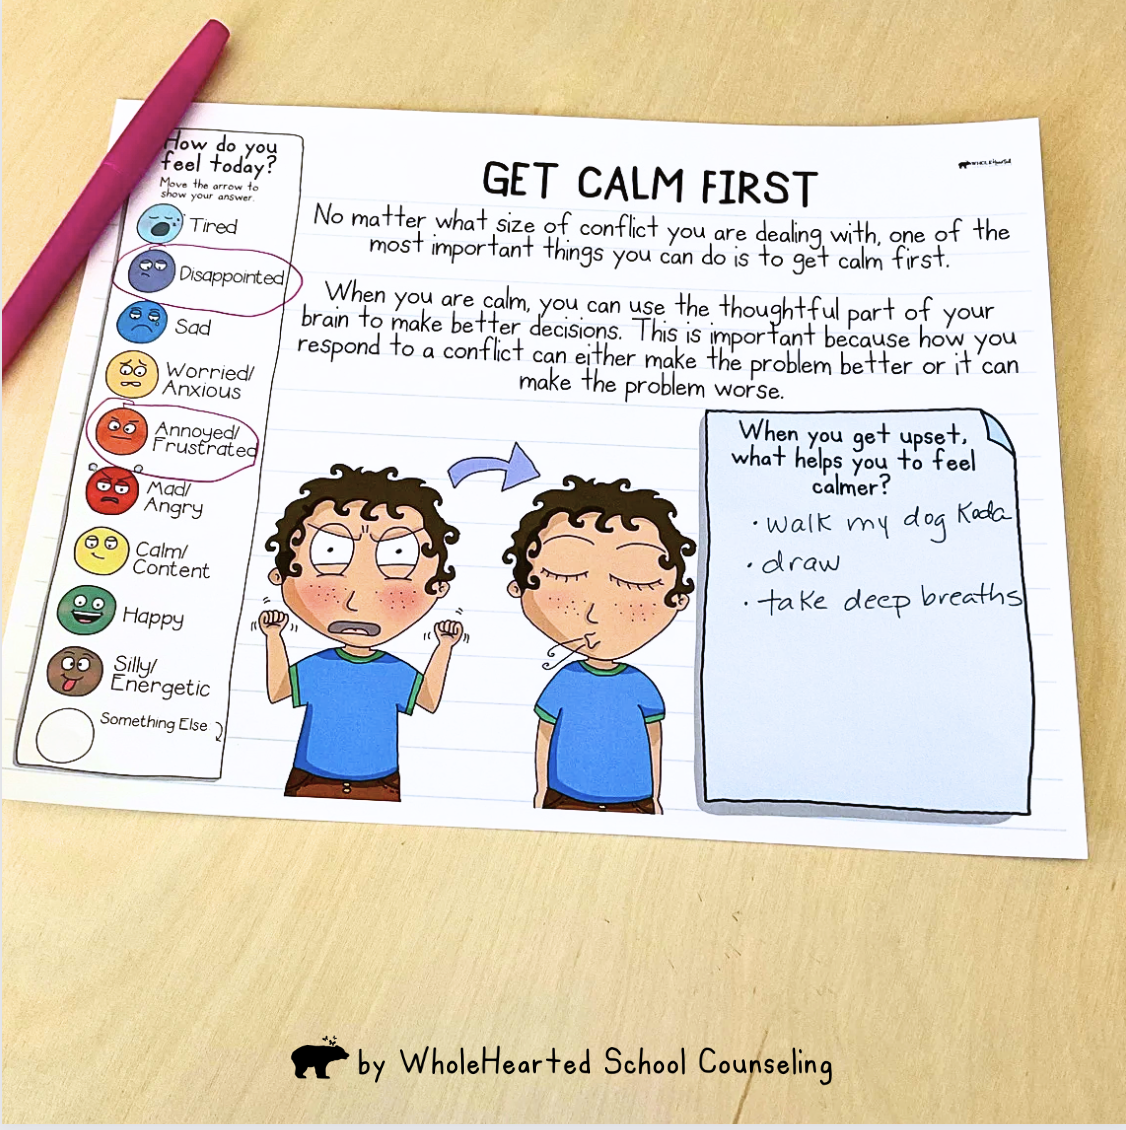 Get Calm First Conflict Resolution Worksheet and Feelings Check-In for Kids on table with pink pen.